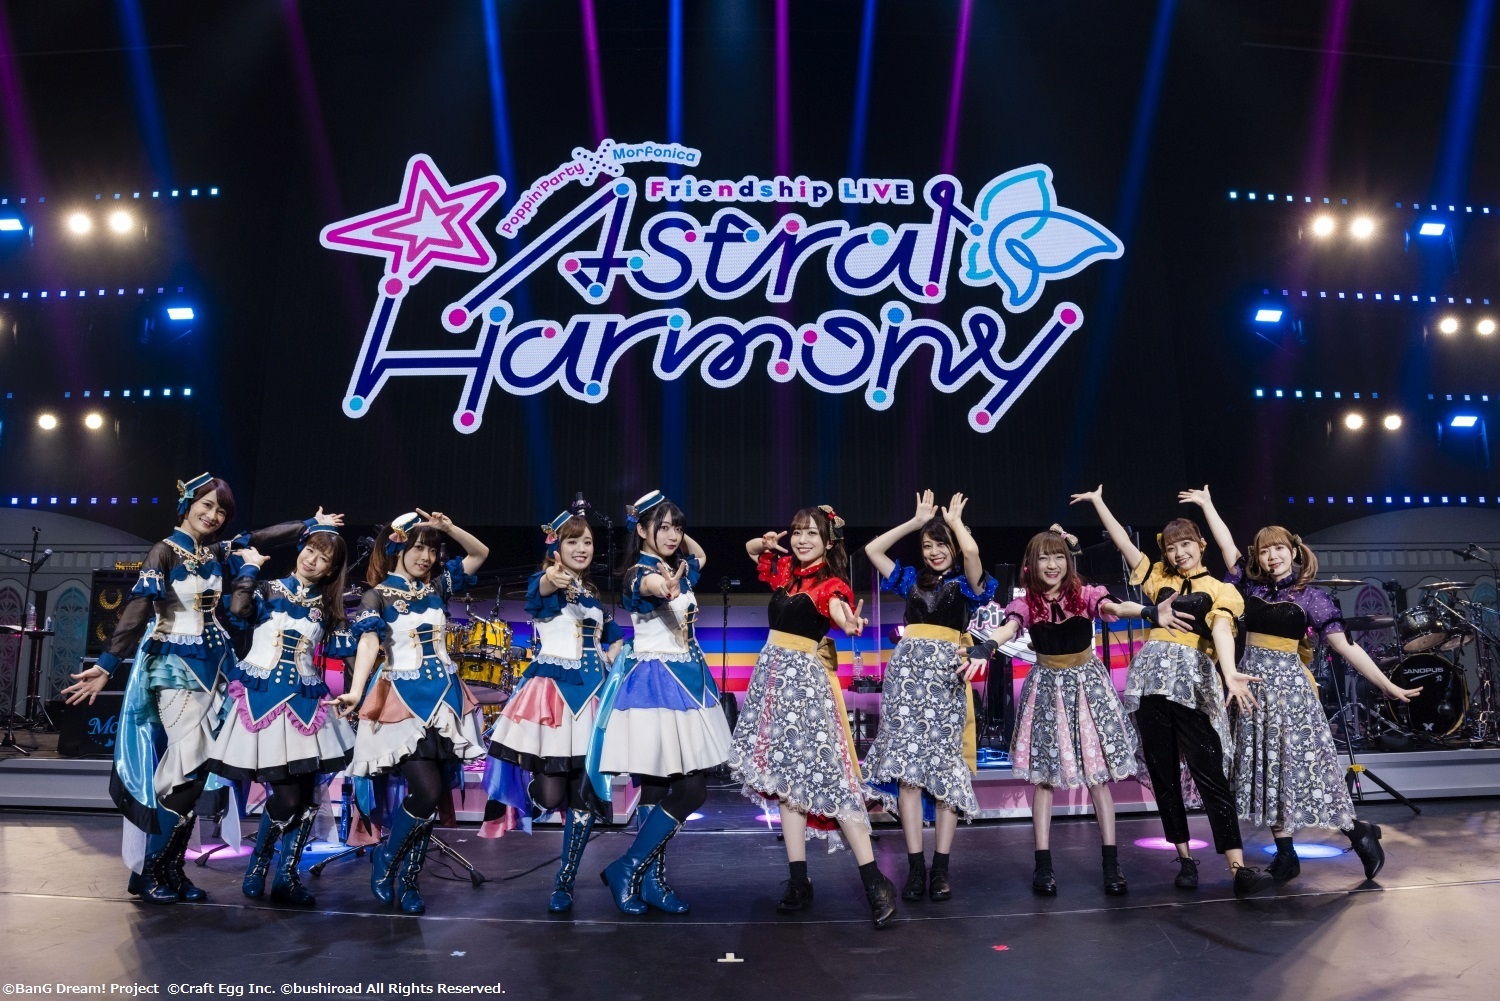 Poppin’Party×Morfonica Friendship LIVE『Astral Harmony』集合写真 (c)BanG Dream! Project (c)Craft Egg Inc. (c)bushiroad All Rights Reserved.